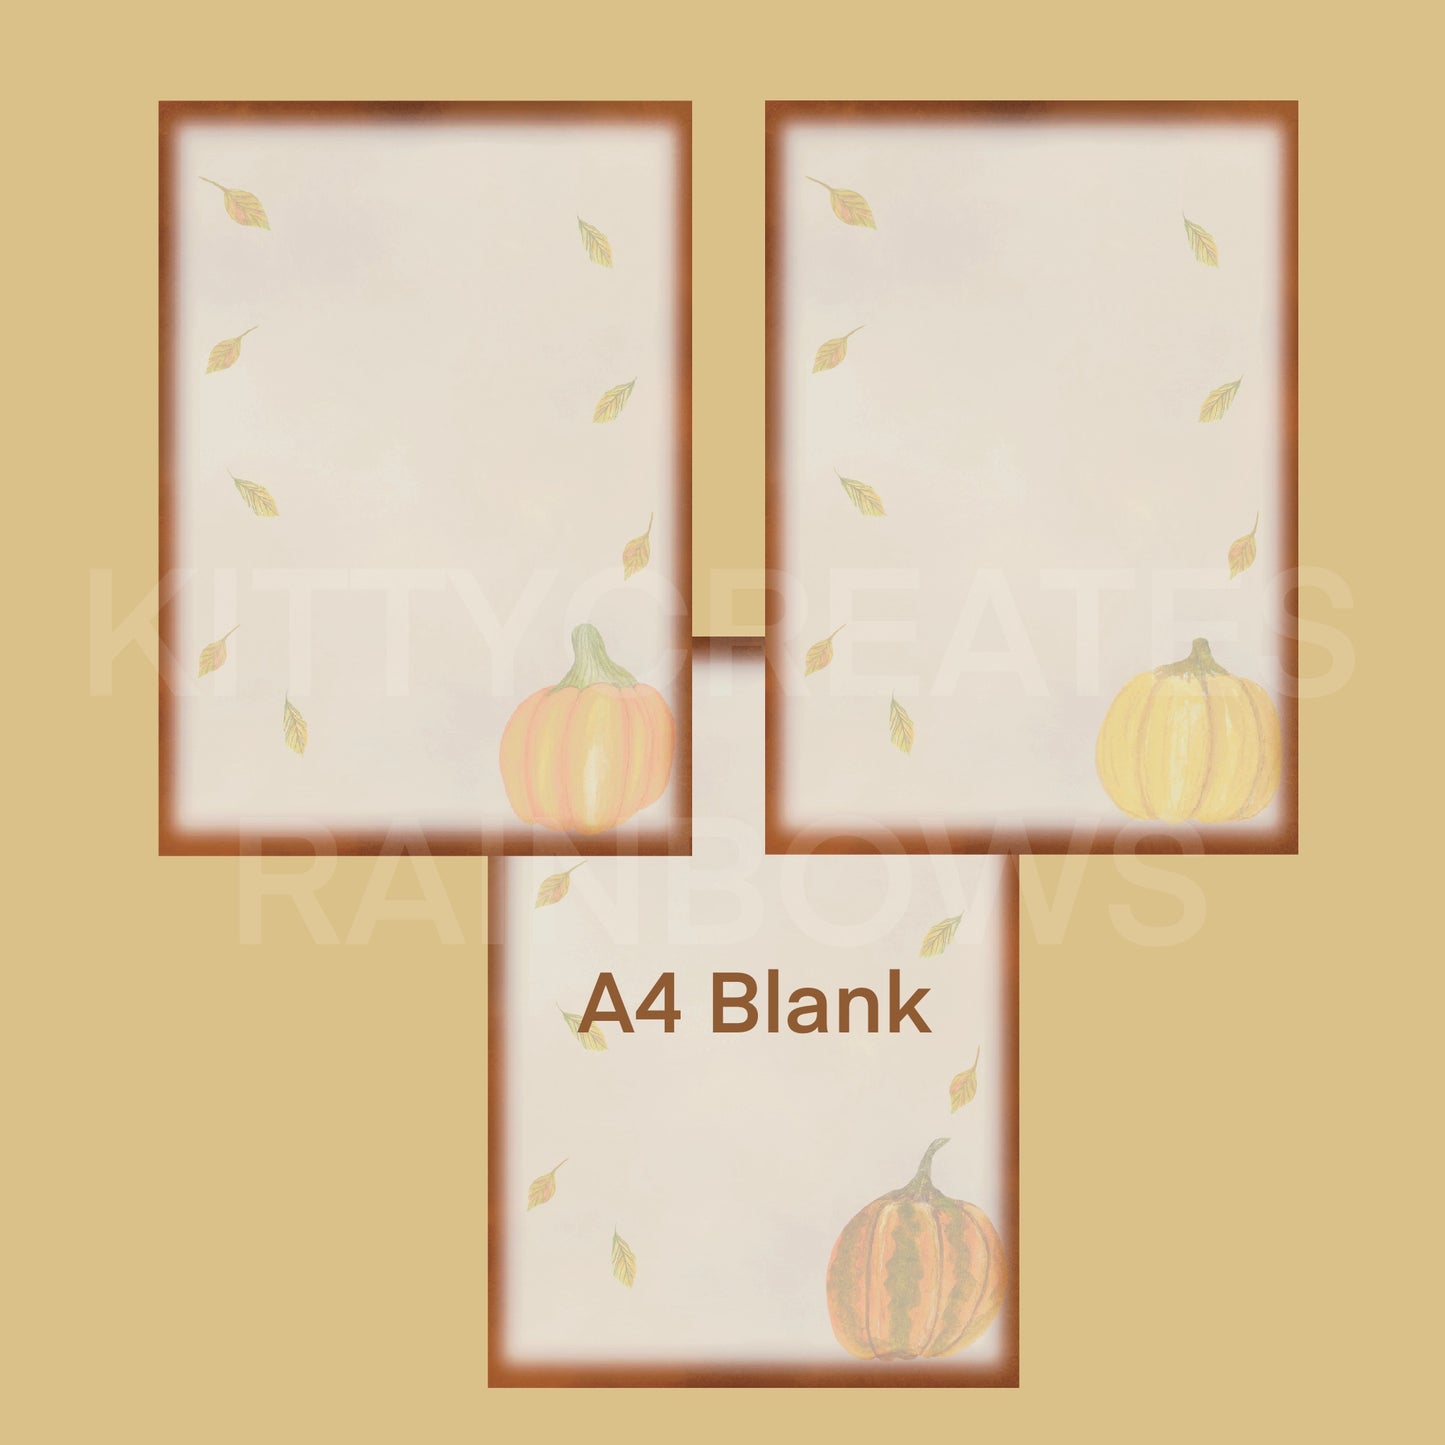 3 images of Fall Forage Pumpkin Writing Papers on a light brown yellow background and a white watermark saying Kitty Creates Rainbows. Text on bottom of image also says in brown text A4 Blank